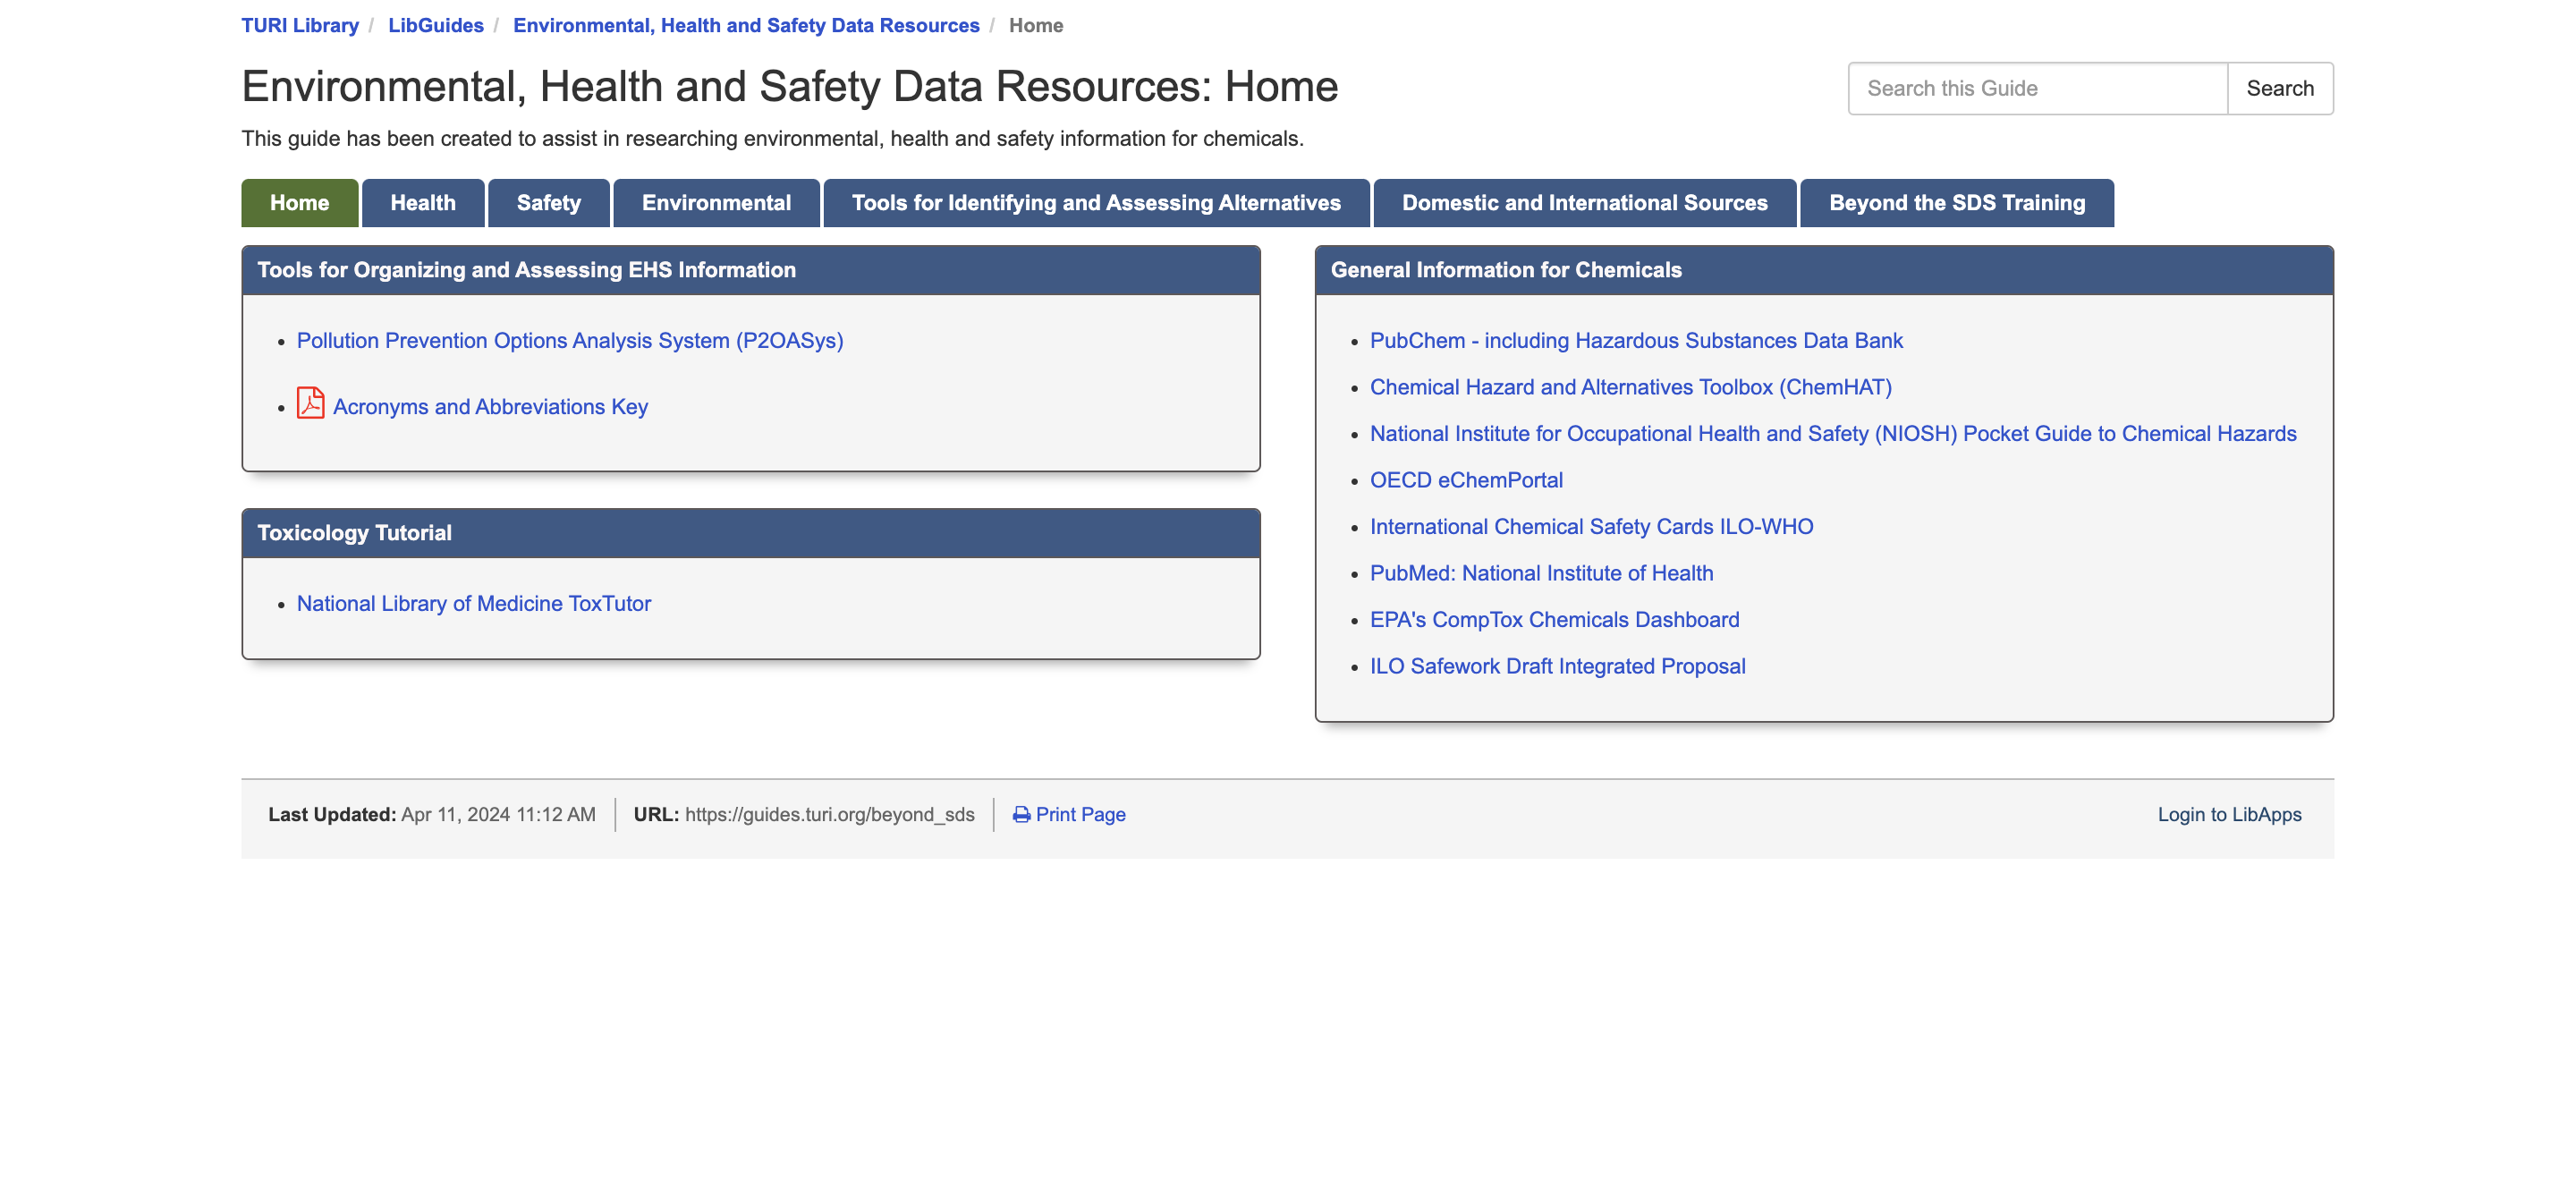 Environmental, Health and Safety Data Resources